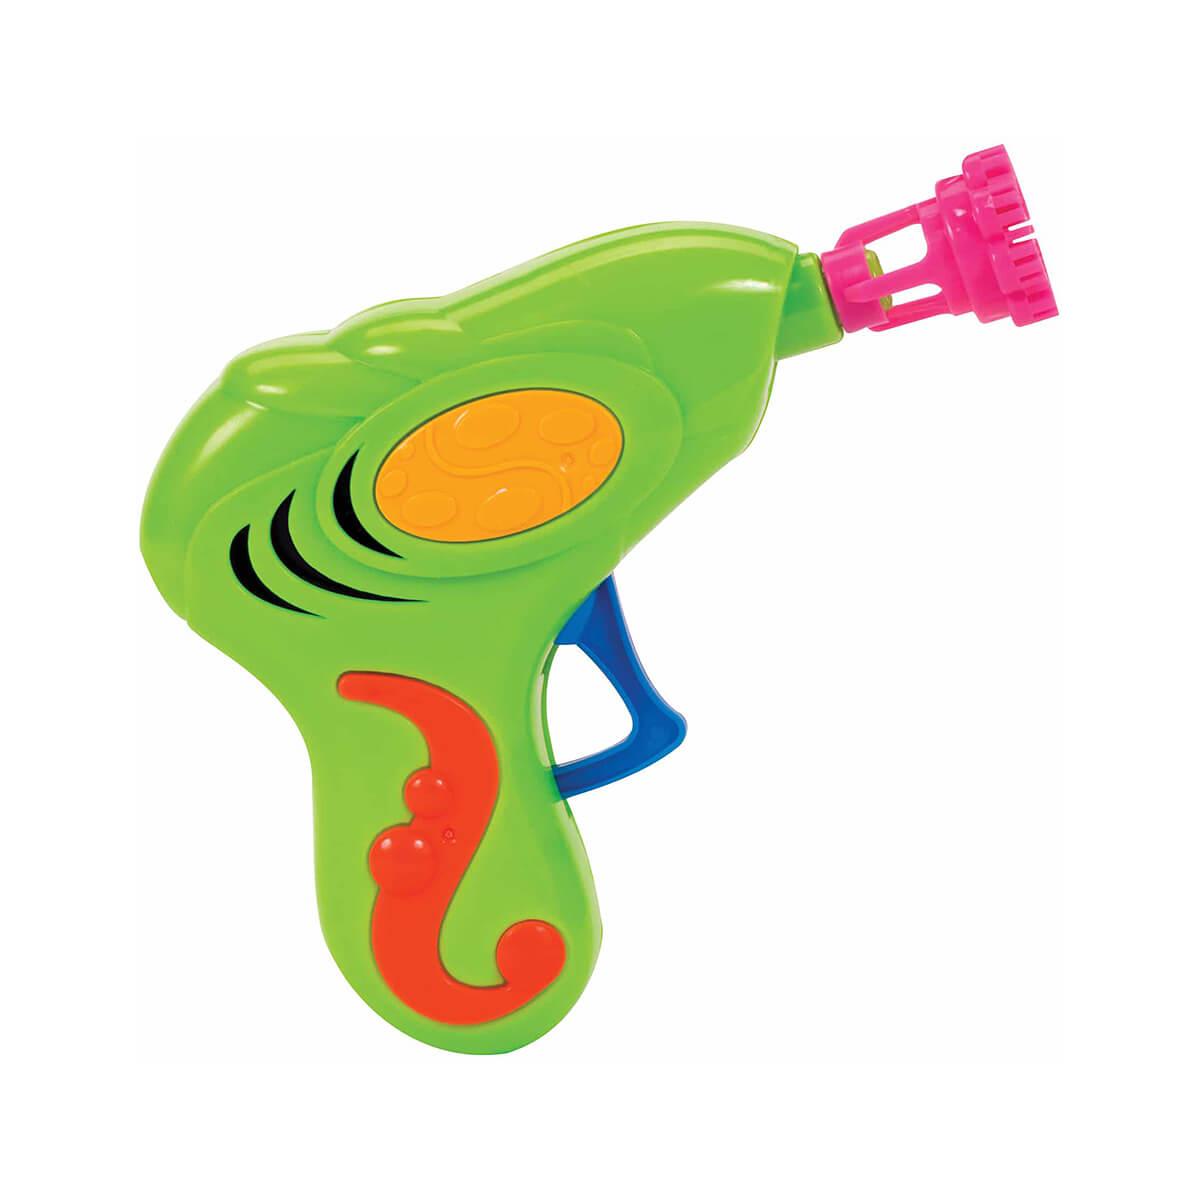 Bubbles Included & NO Batteries Required! Friction Bubble Gun Toy with Lights 